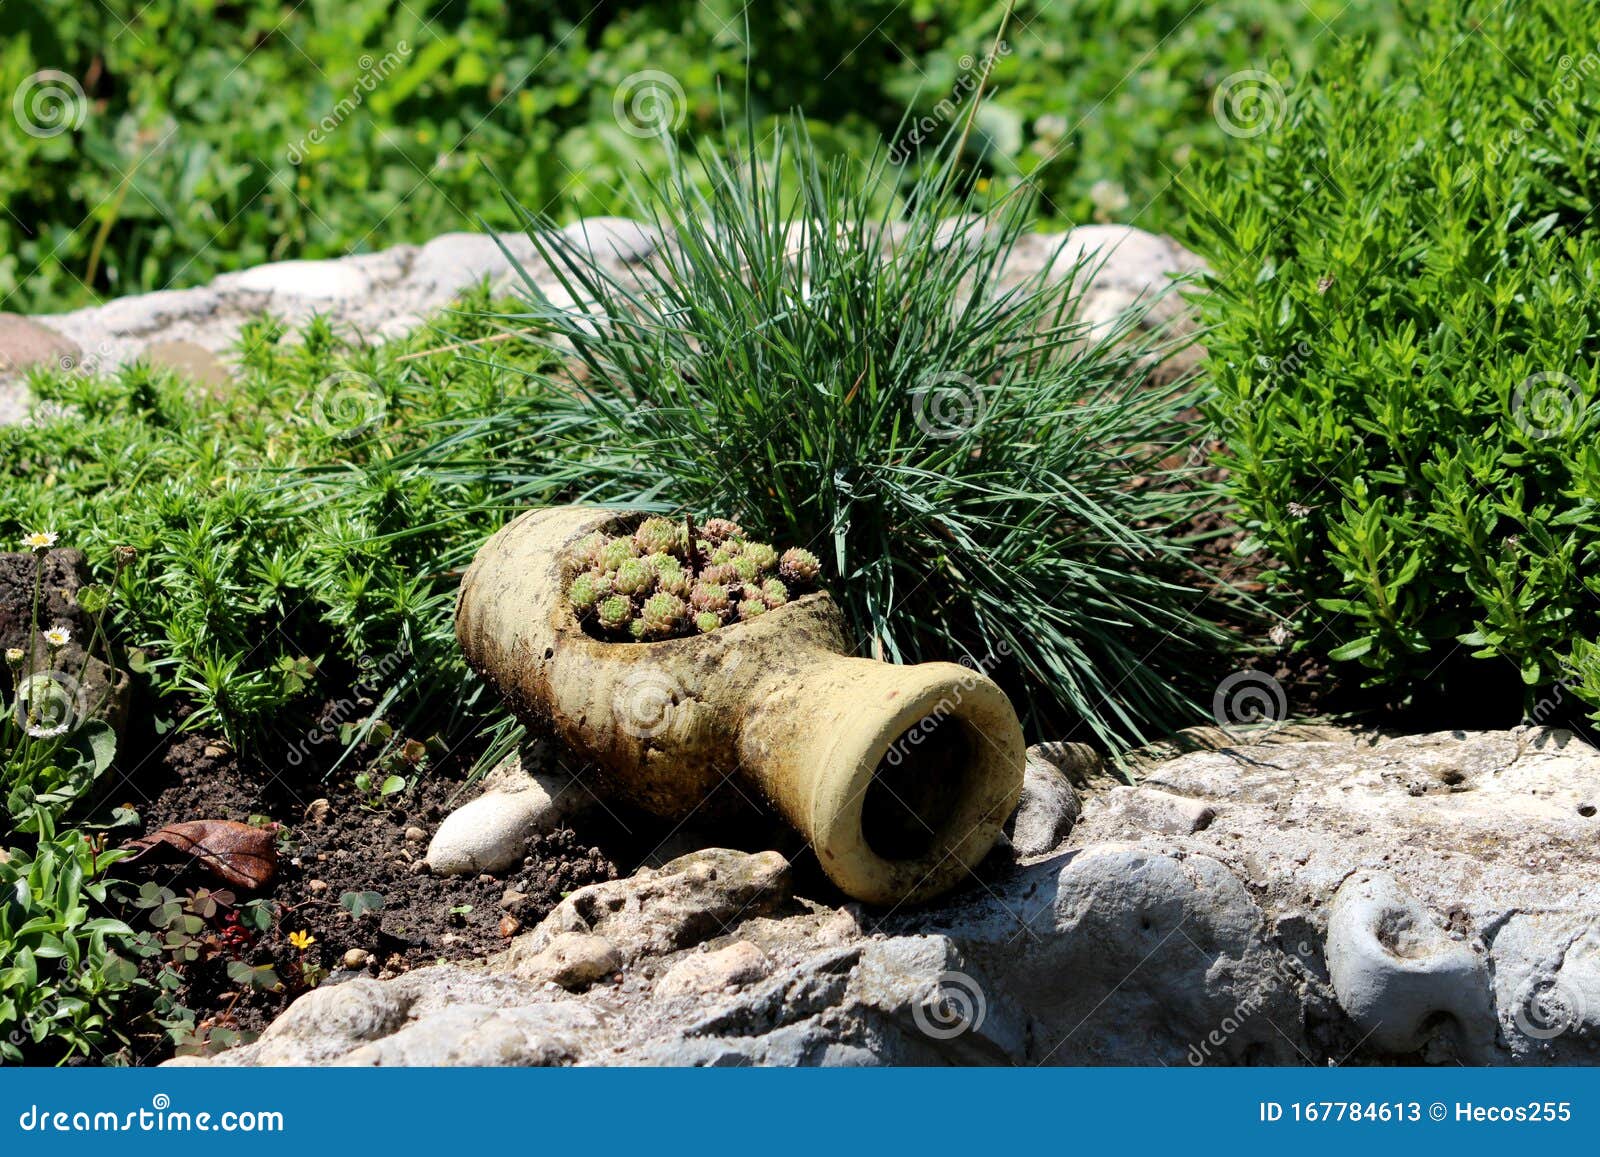 Decorative Garden Amphora Filled with Sedum or Stonecrop Ground Cover  Plants Surrounded with Other Plants and Rocks in Home Garden Stock Image -  Image of leaves, thick: 167784613